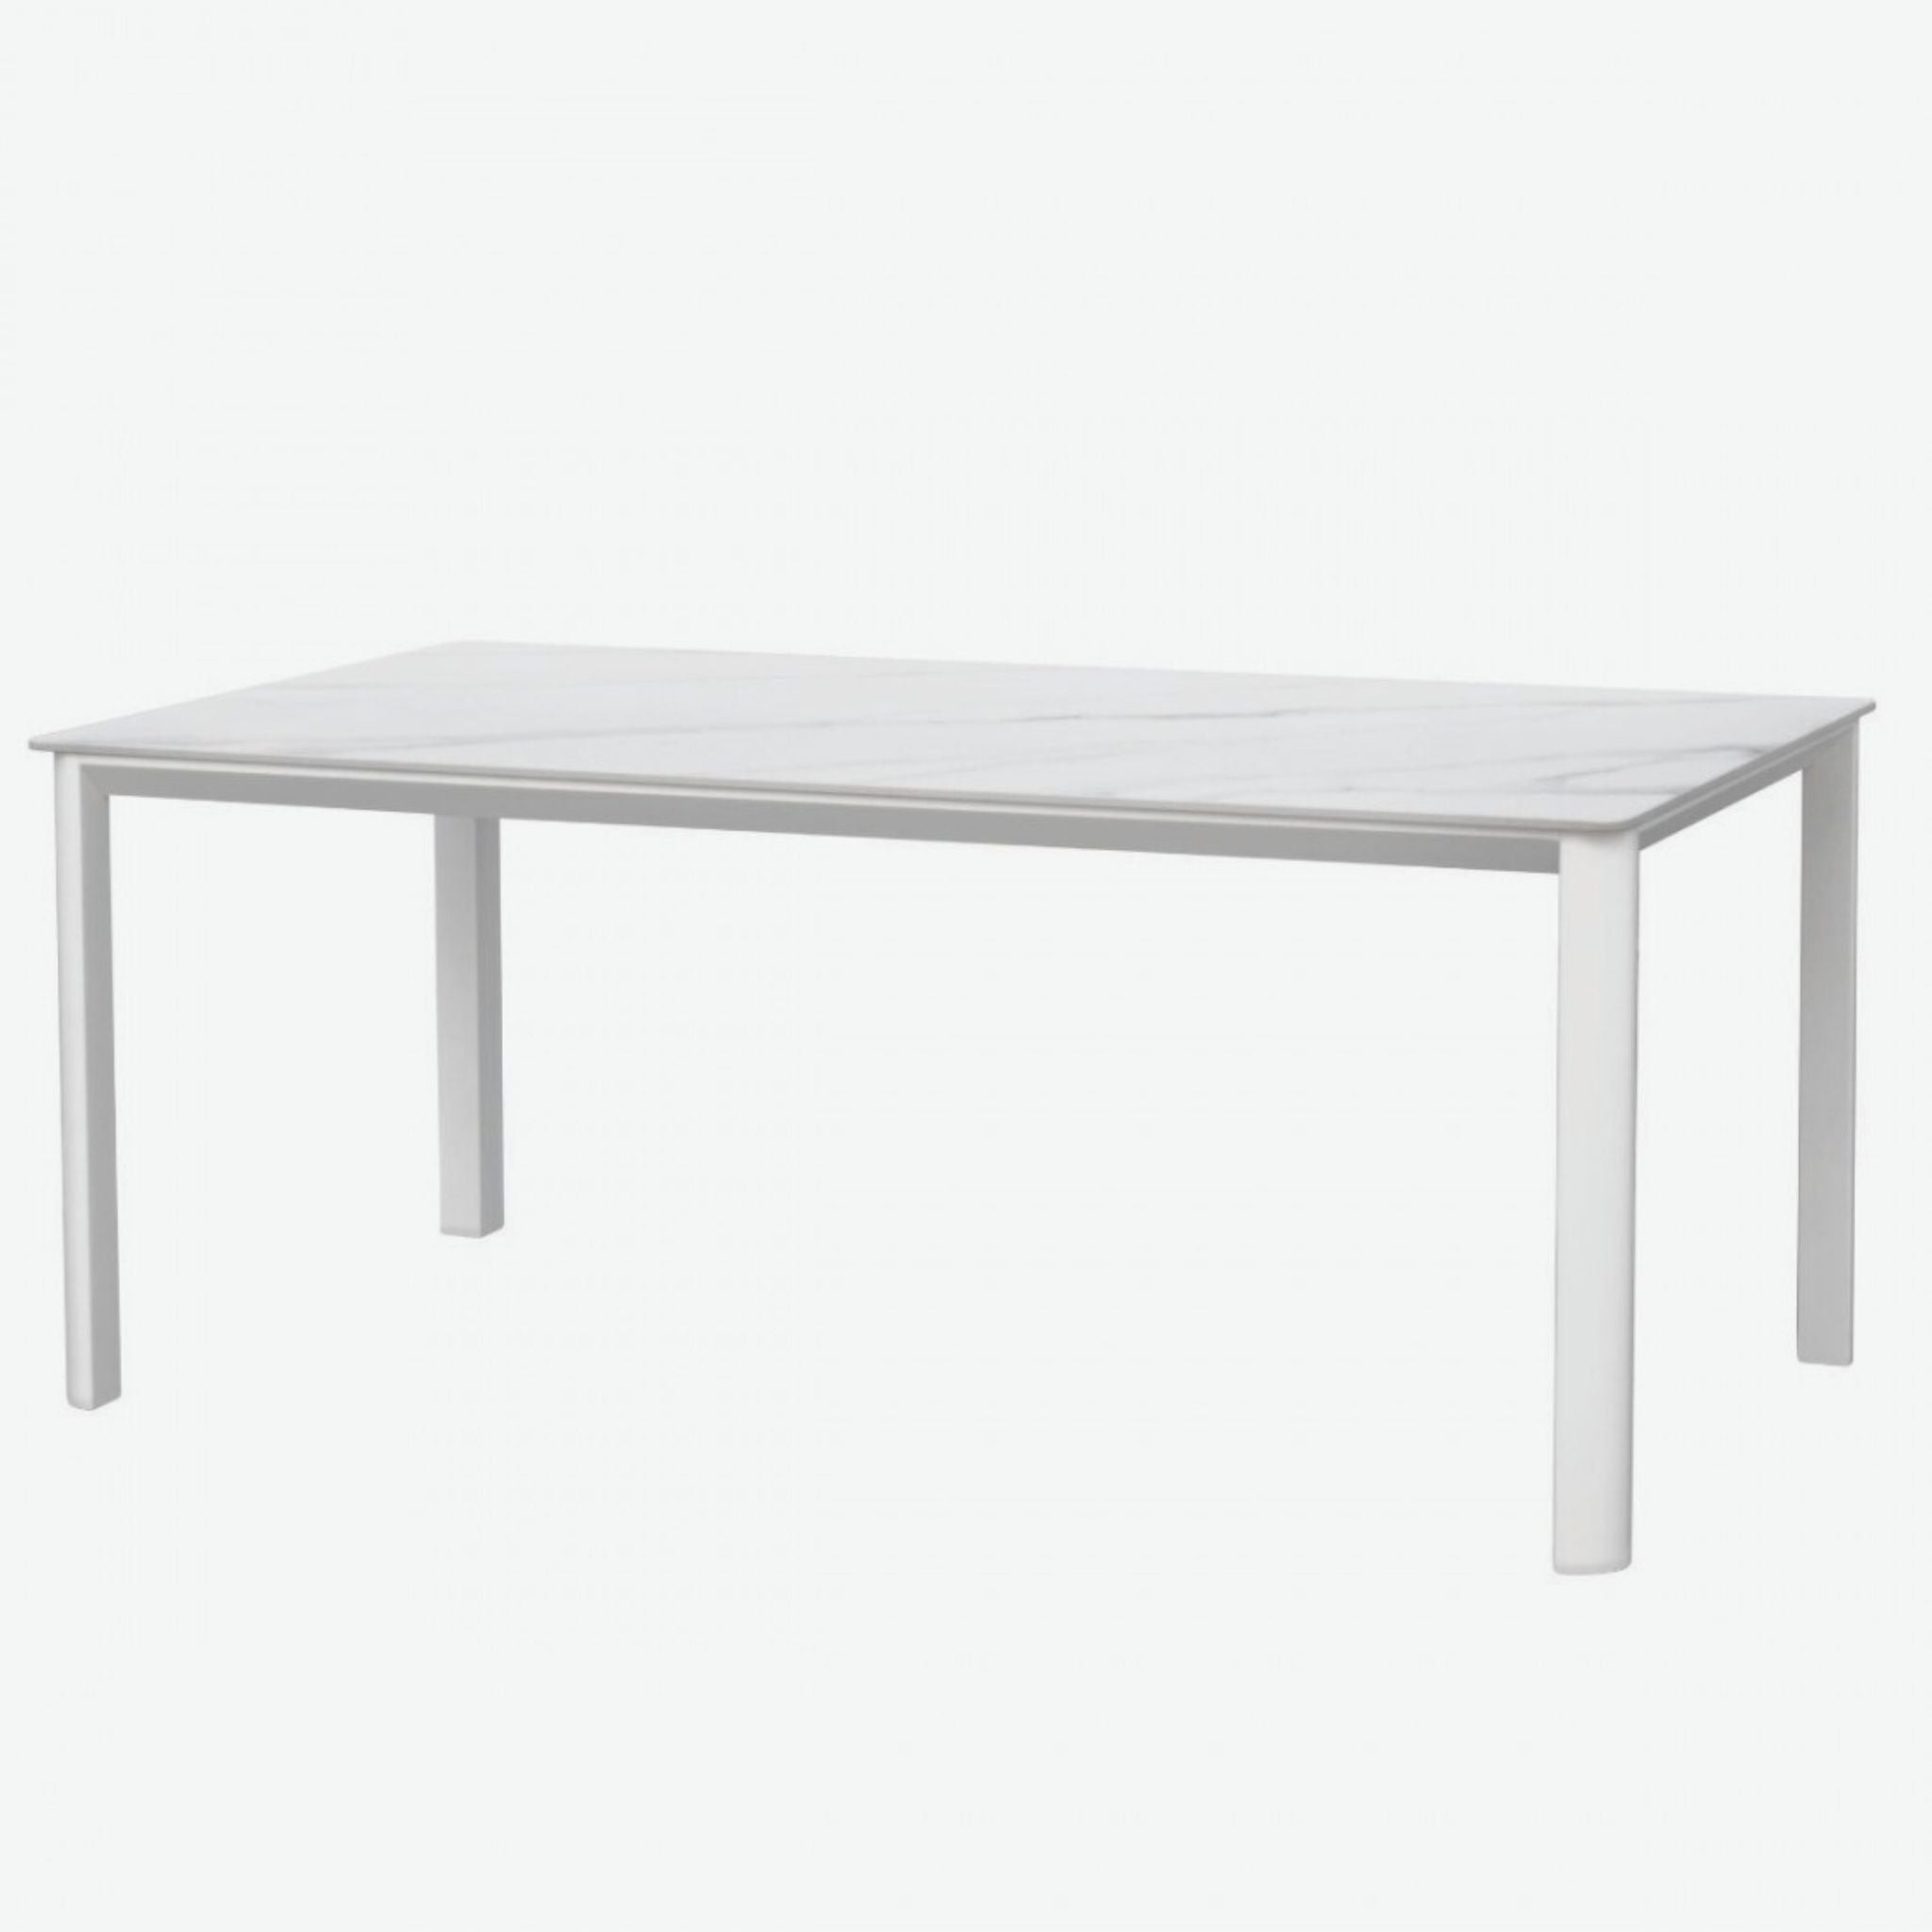 Crisal Decoracion Violet-4 Outdoor Table White Aluminum and Stone - ModernistaLiving